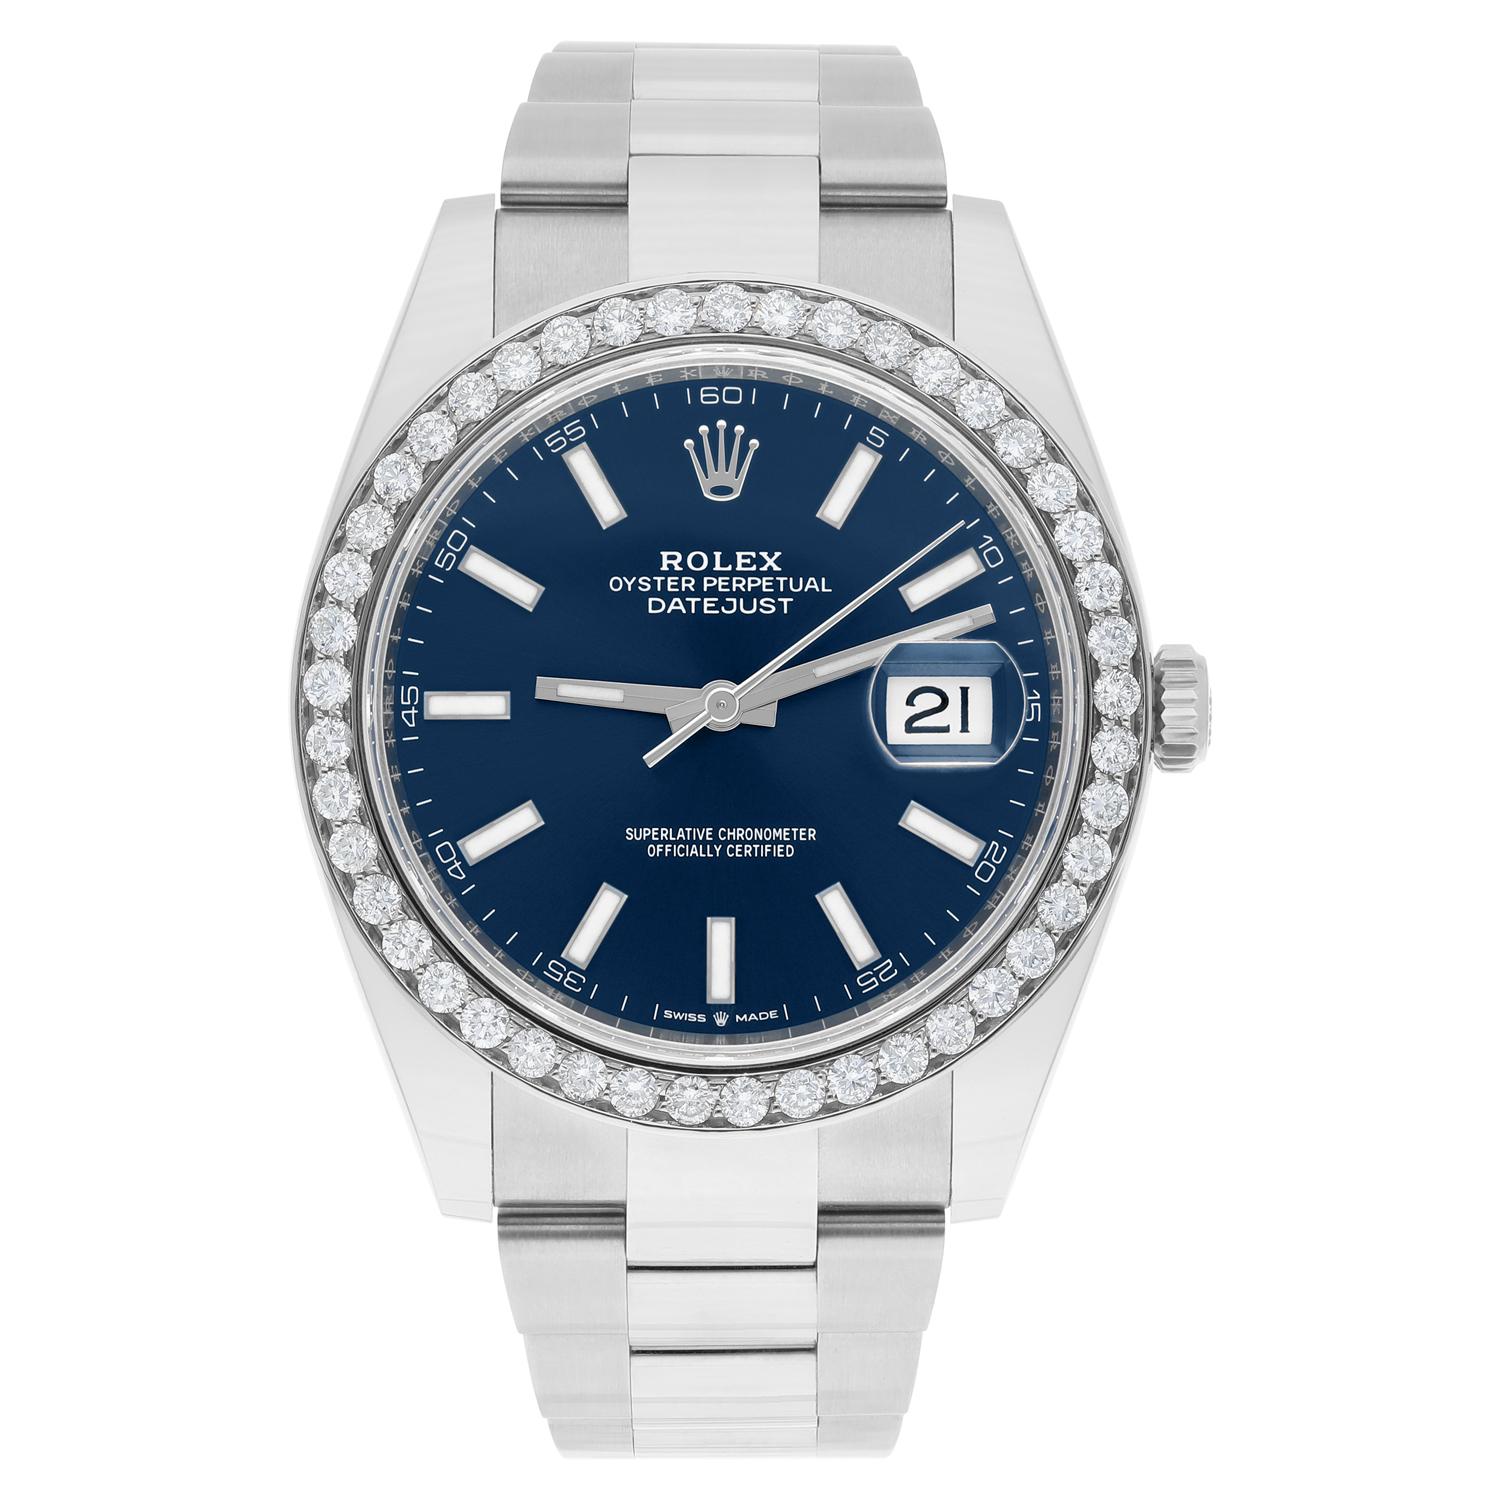 This magnificent Rolex Datejust wristwatch is a true masterpiece of Swiss craftsmanship. With its exquisite Blue Dial and elegant Index indicators, it is the epitome of luxury and style. The 41mm stainless steel case and custom diamond bezel make